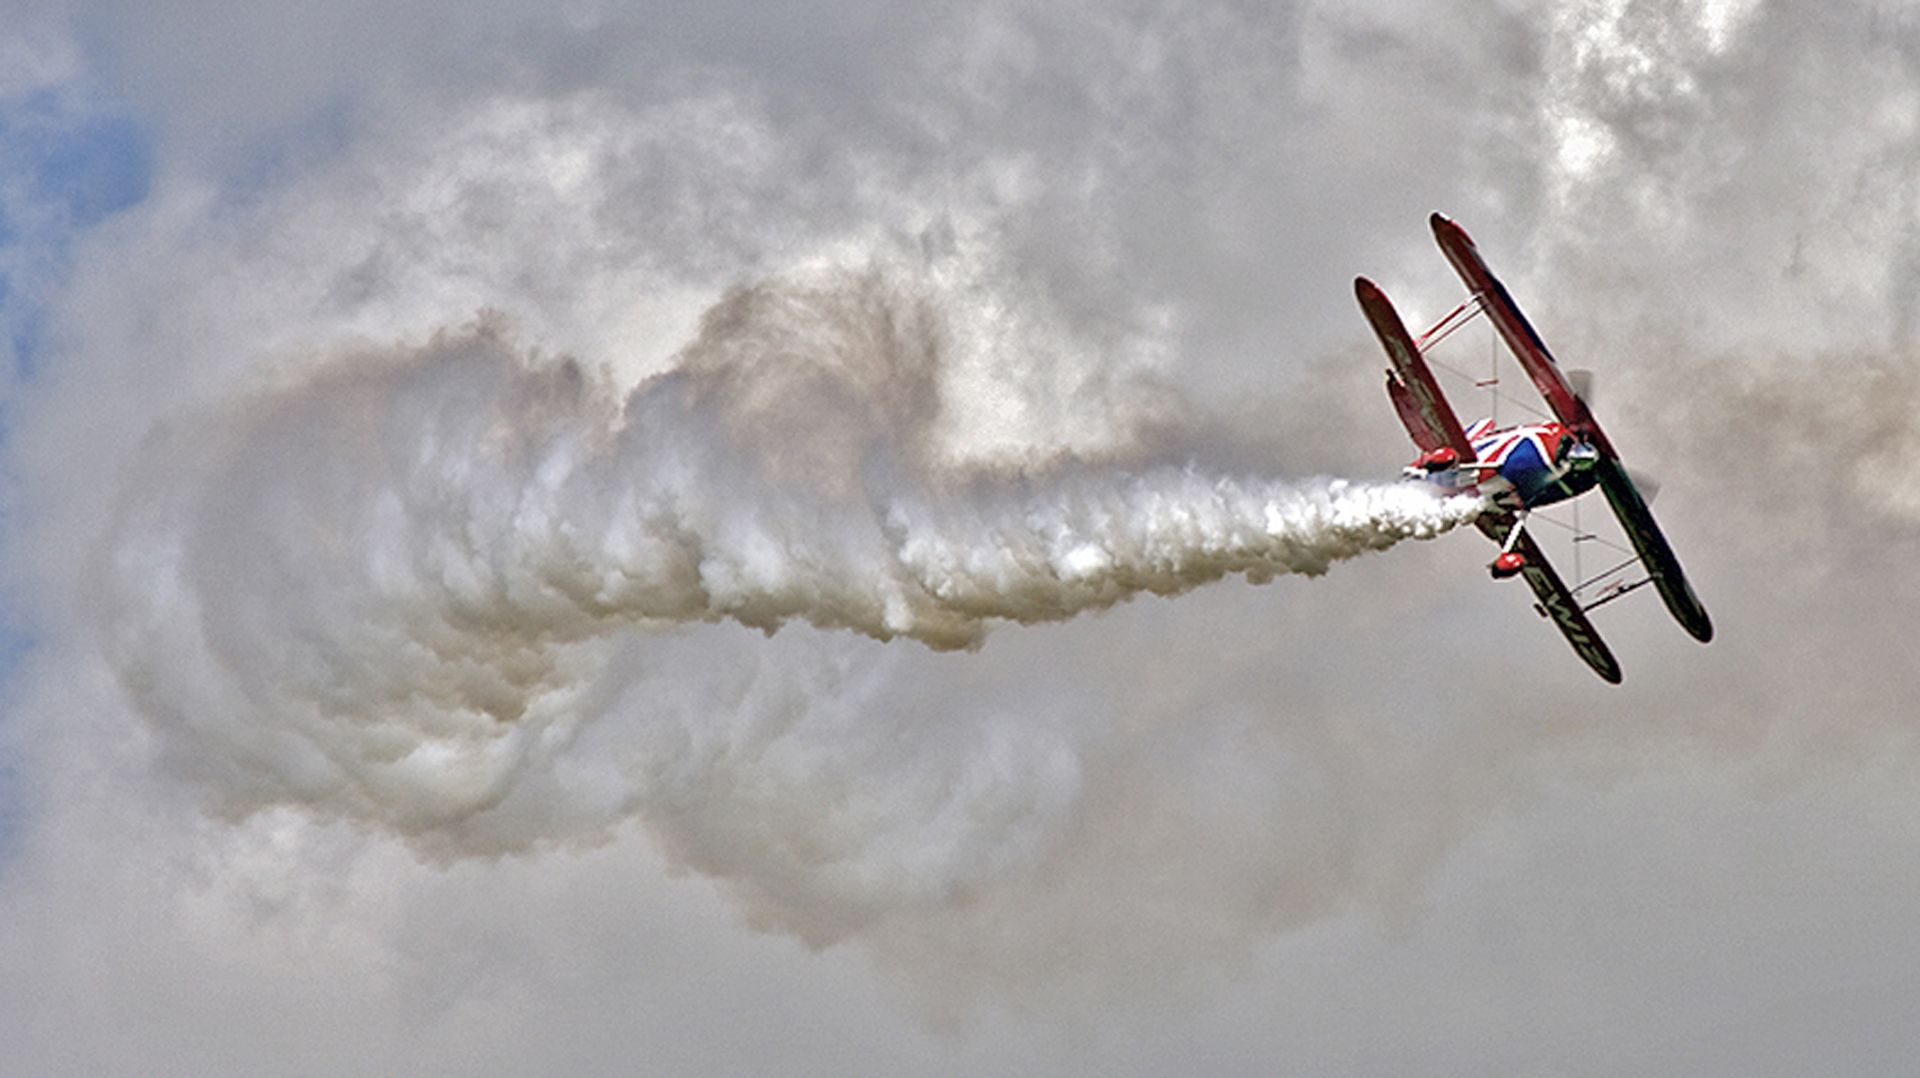 PITTS Special (S-2) (G-EWIZ) - Rich Goodwins Pitts Special at Throckmorton, UK - 6th June 2015